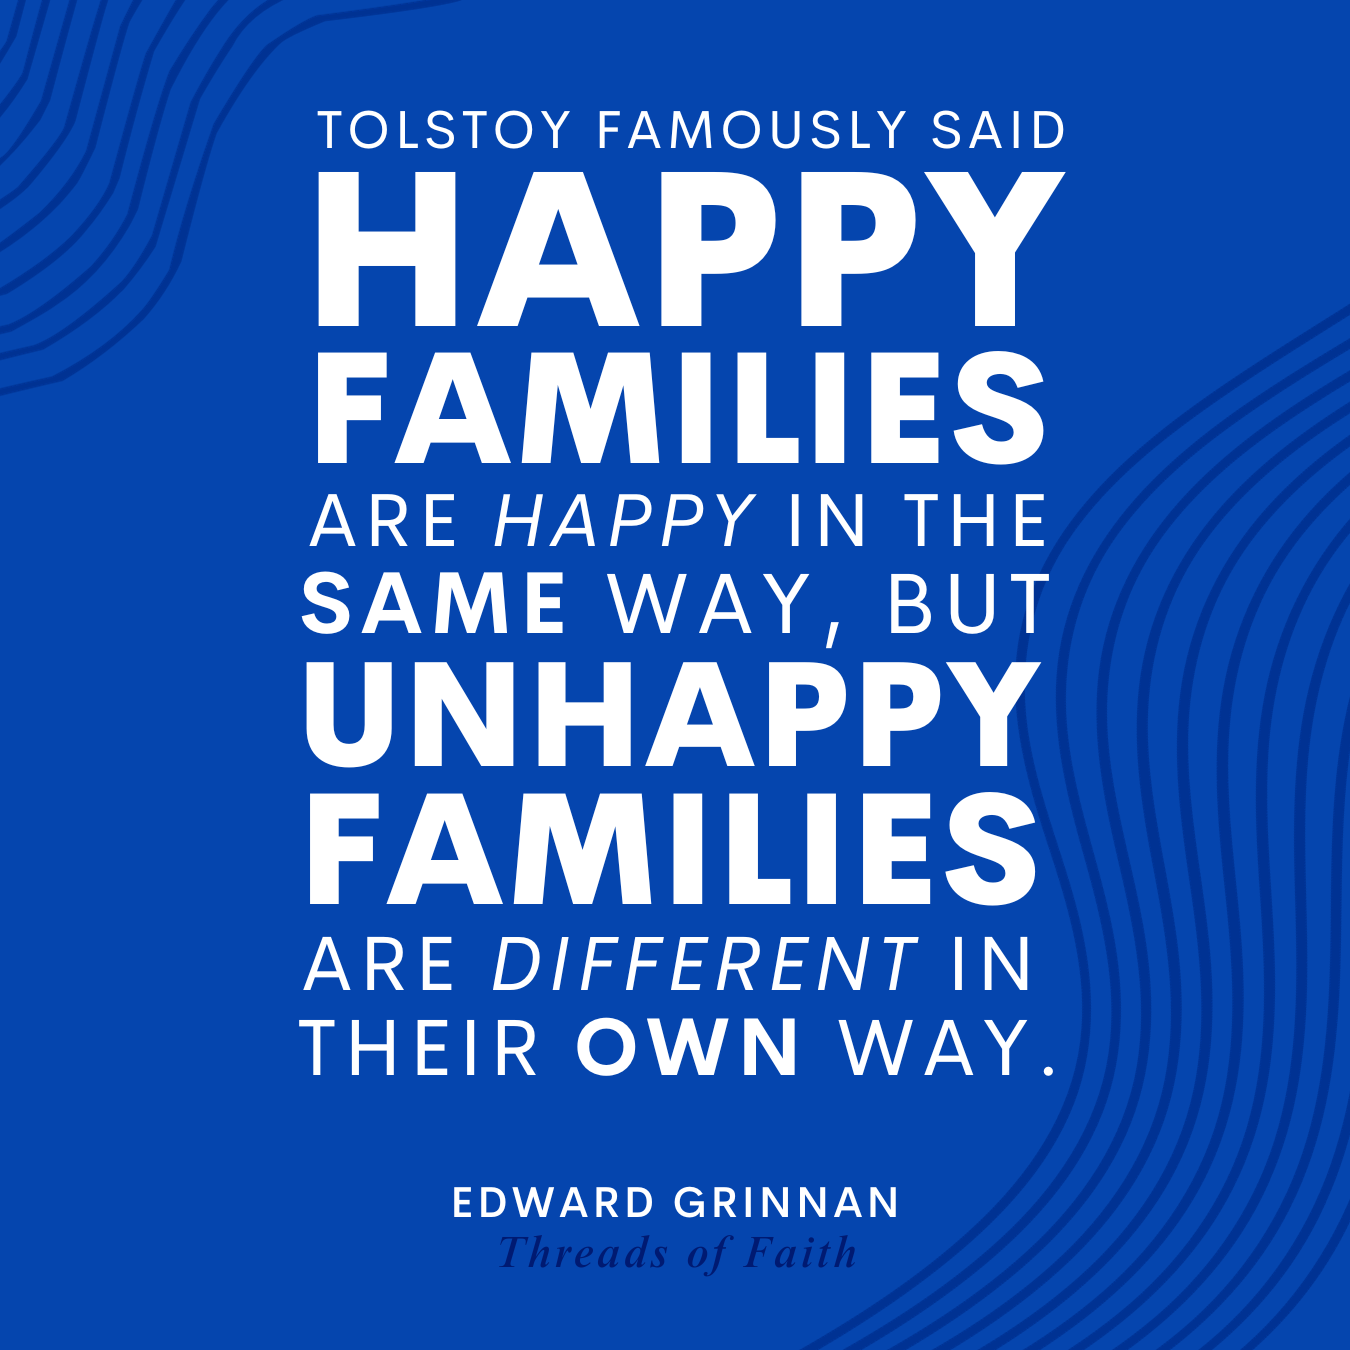 quote about happy families from tolstoy